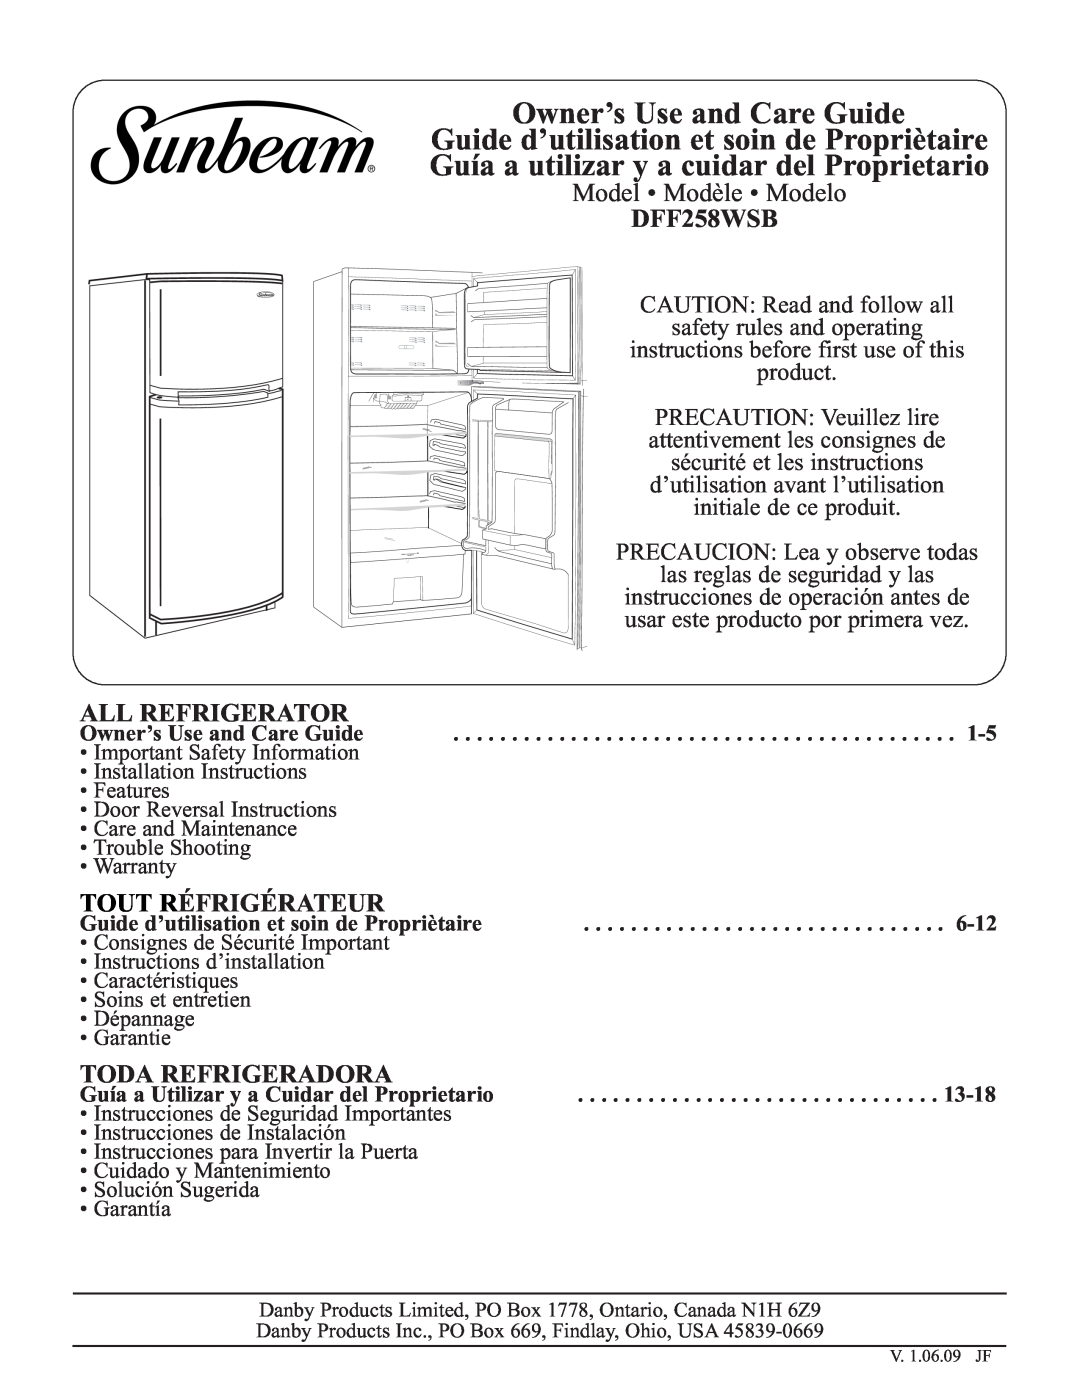 Sunbeam DFF258WSB installation instructions Owner’s Use and Care Guide, Guide d’utilisation et soin de Propriètaire 